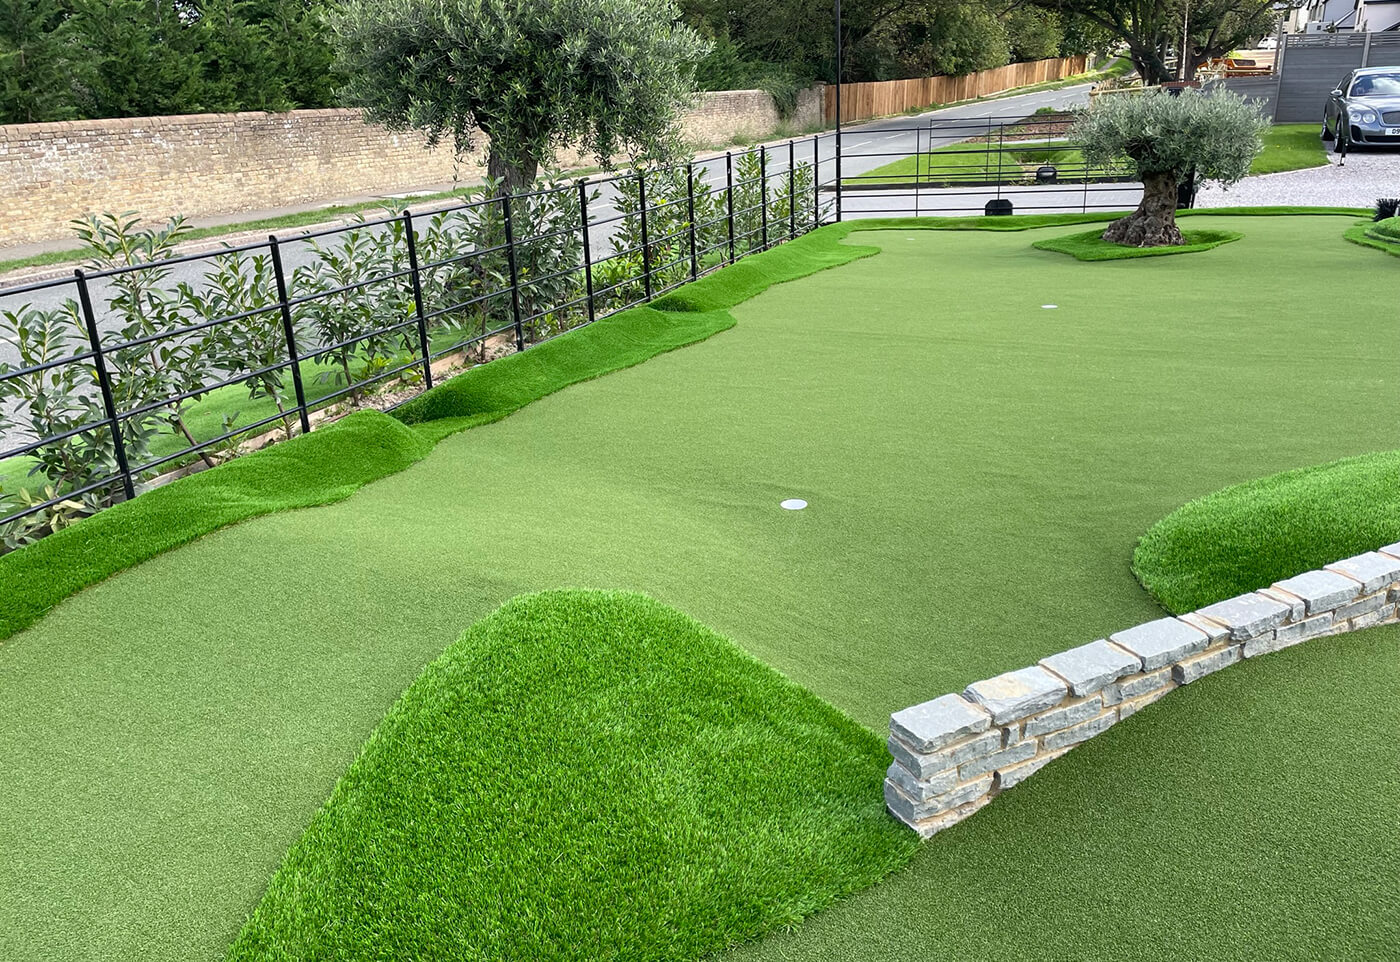 LazyLawn Artificial grass on a golf course